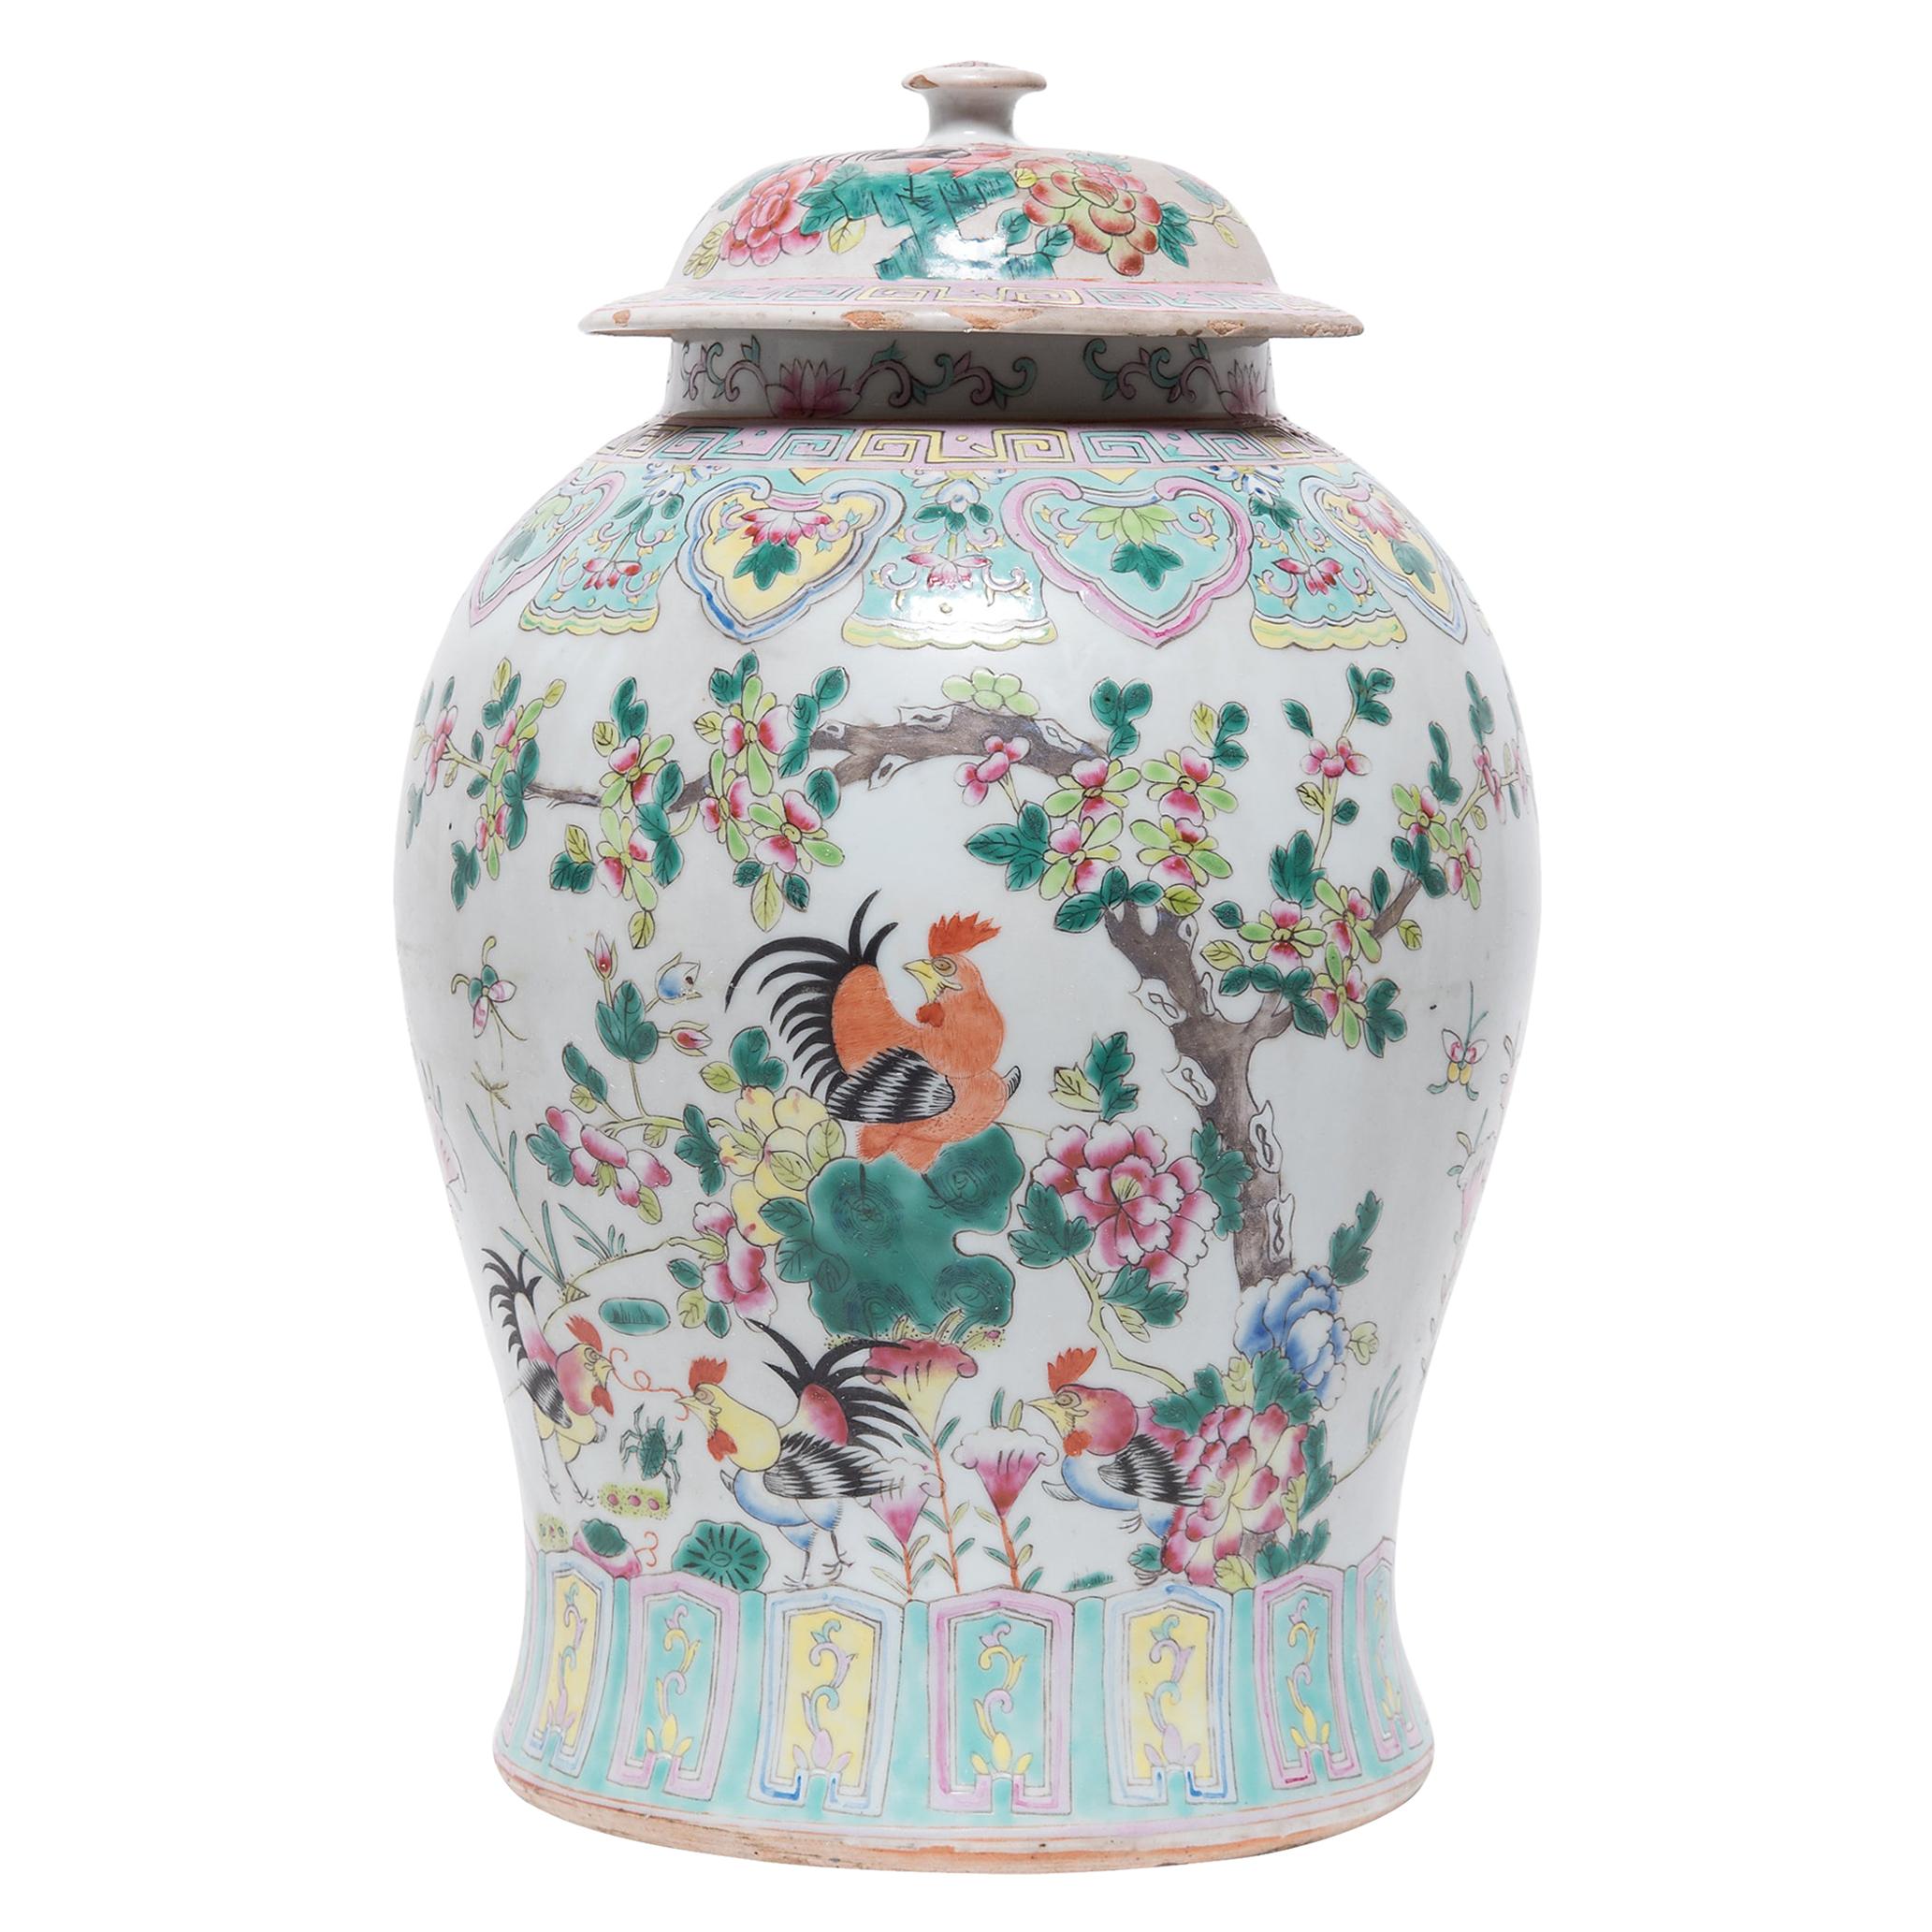 Chinese Famille Rose Rooster Baluster Jar, c. 1900